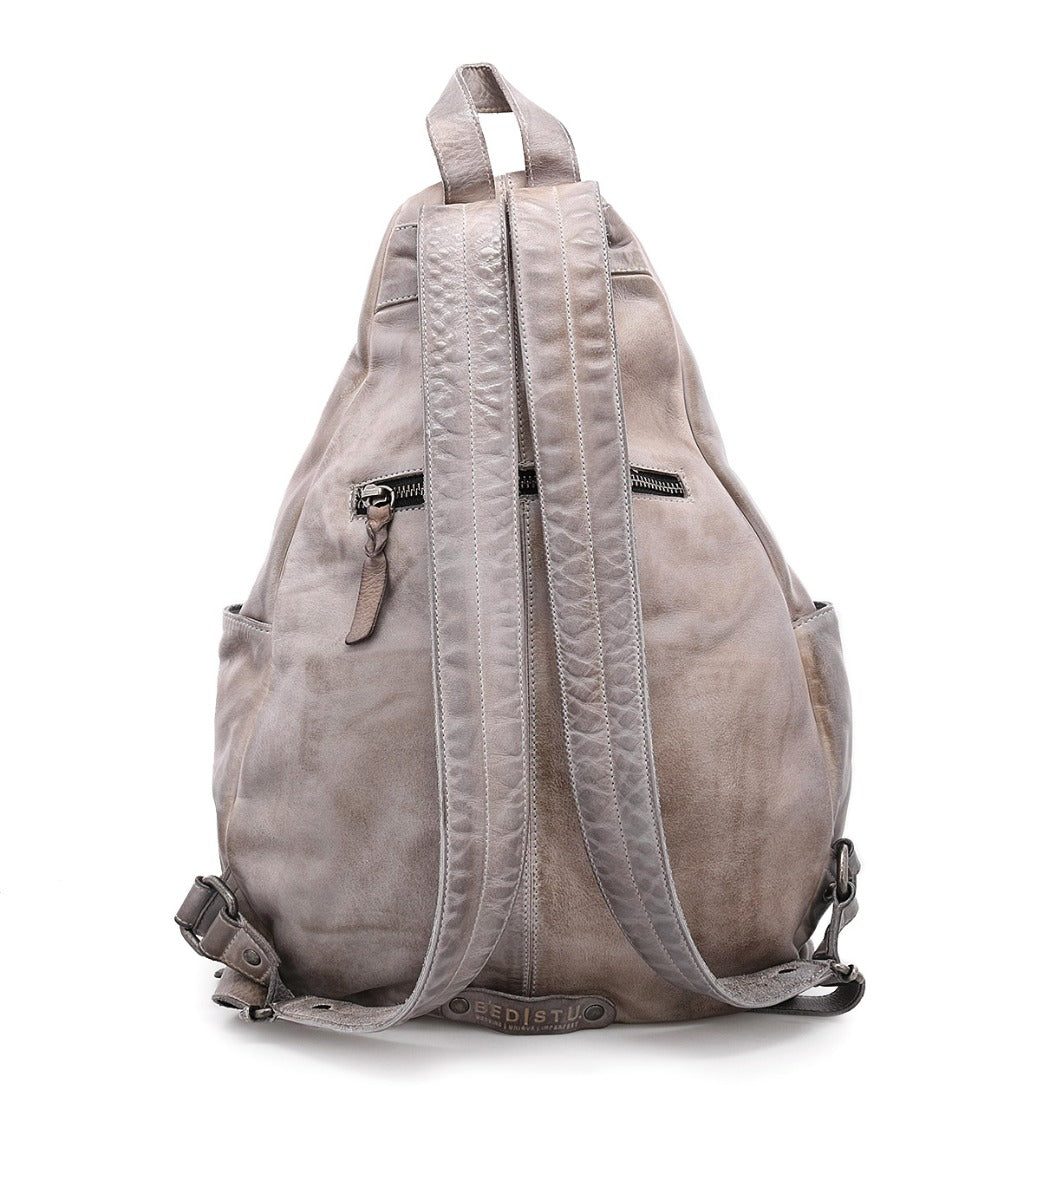 A Tommie backpack by Bed Stu, made of grey leather with zippers on the back.